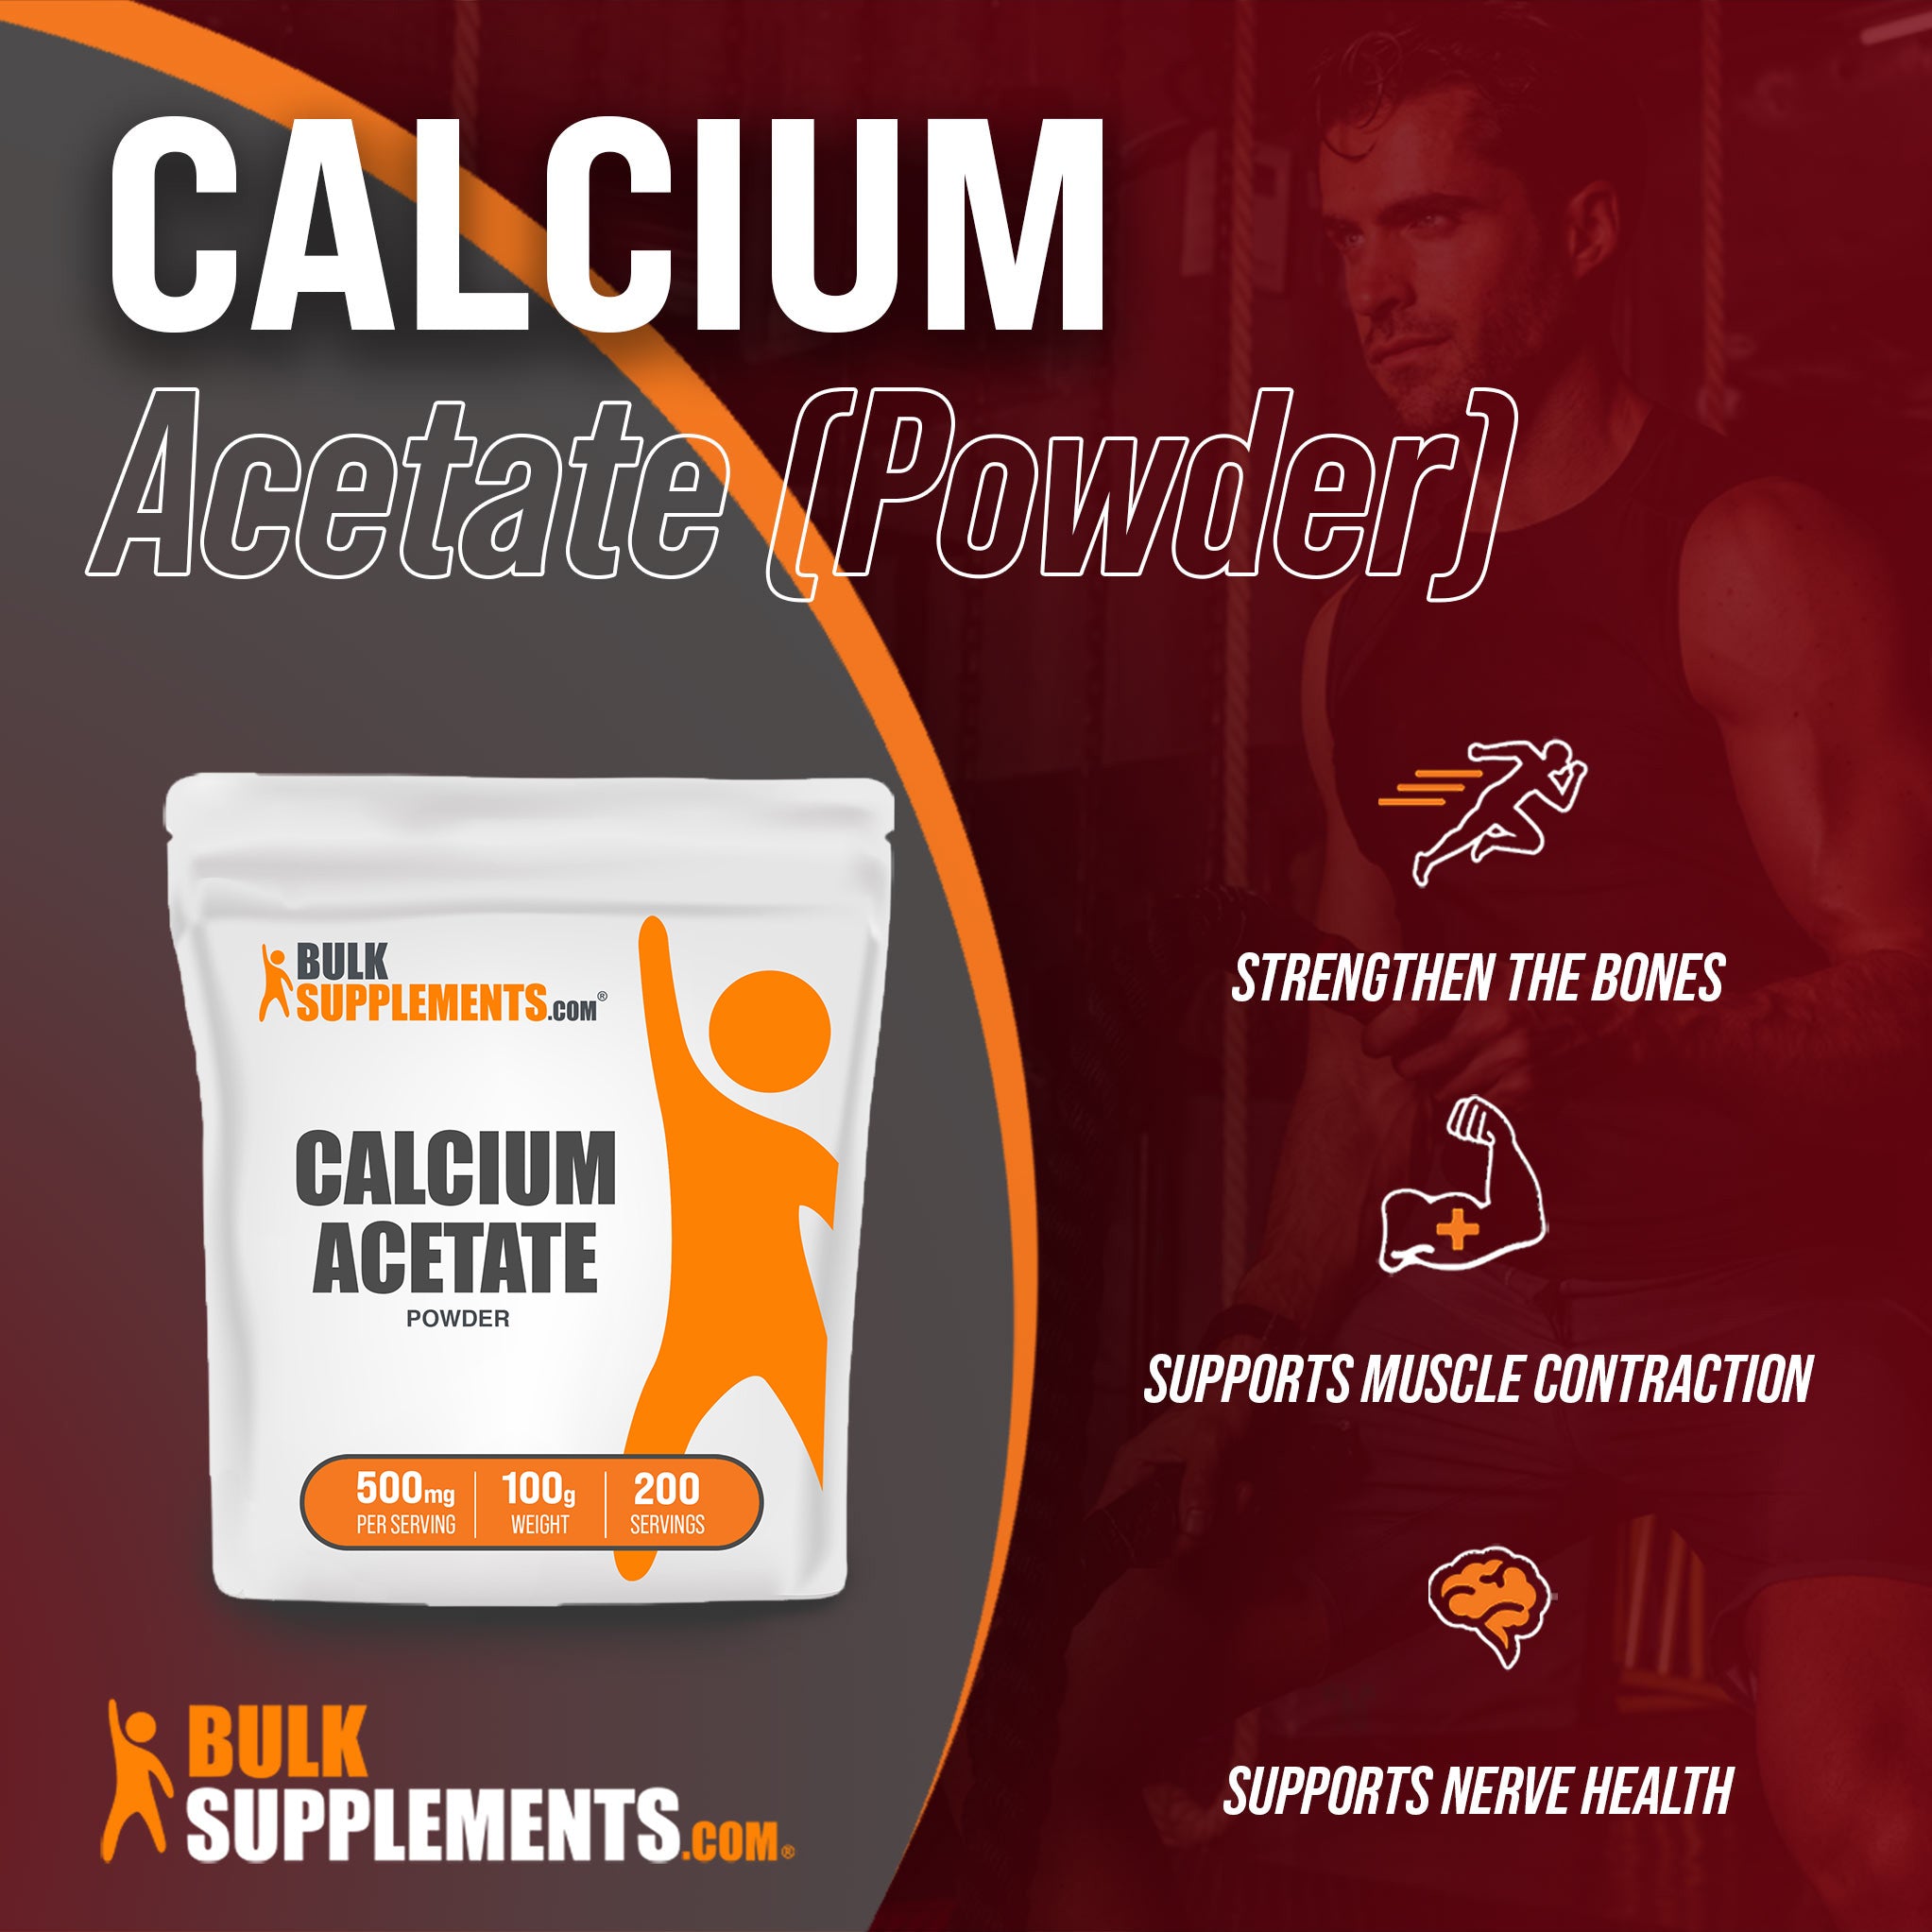 Benefits of our 100g Calcium Supplement; strengthens the bones, supports muscle contraction, supports nerve health